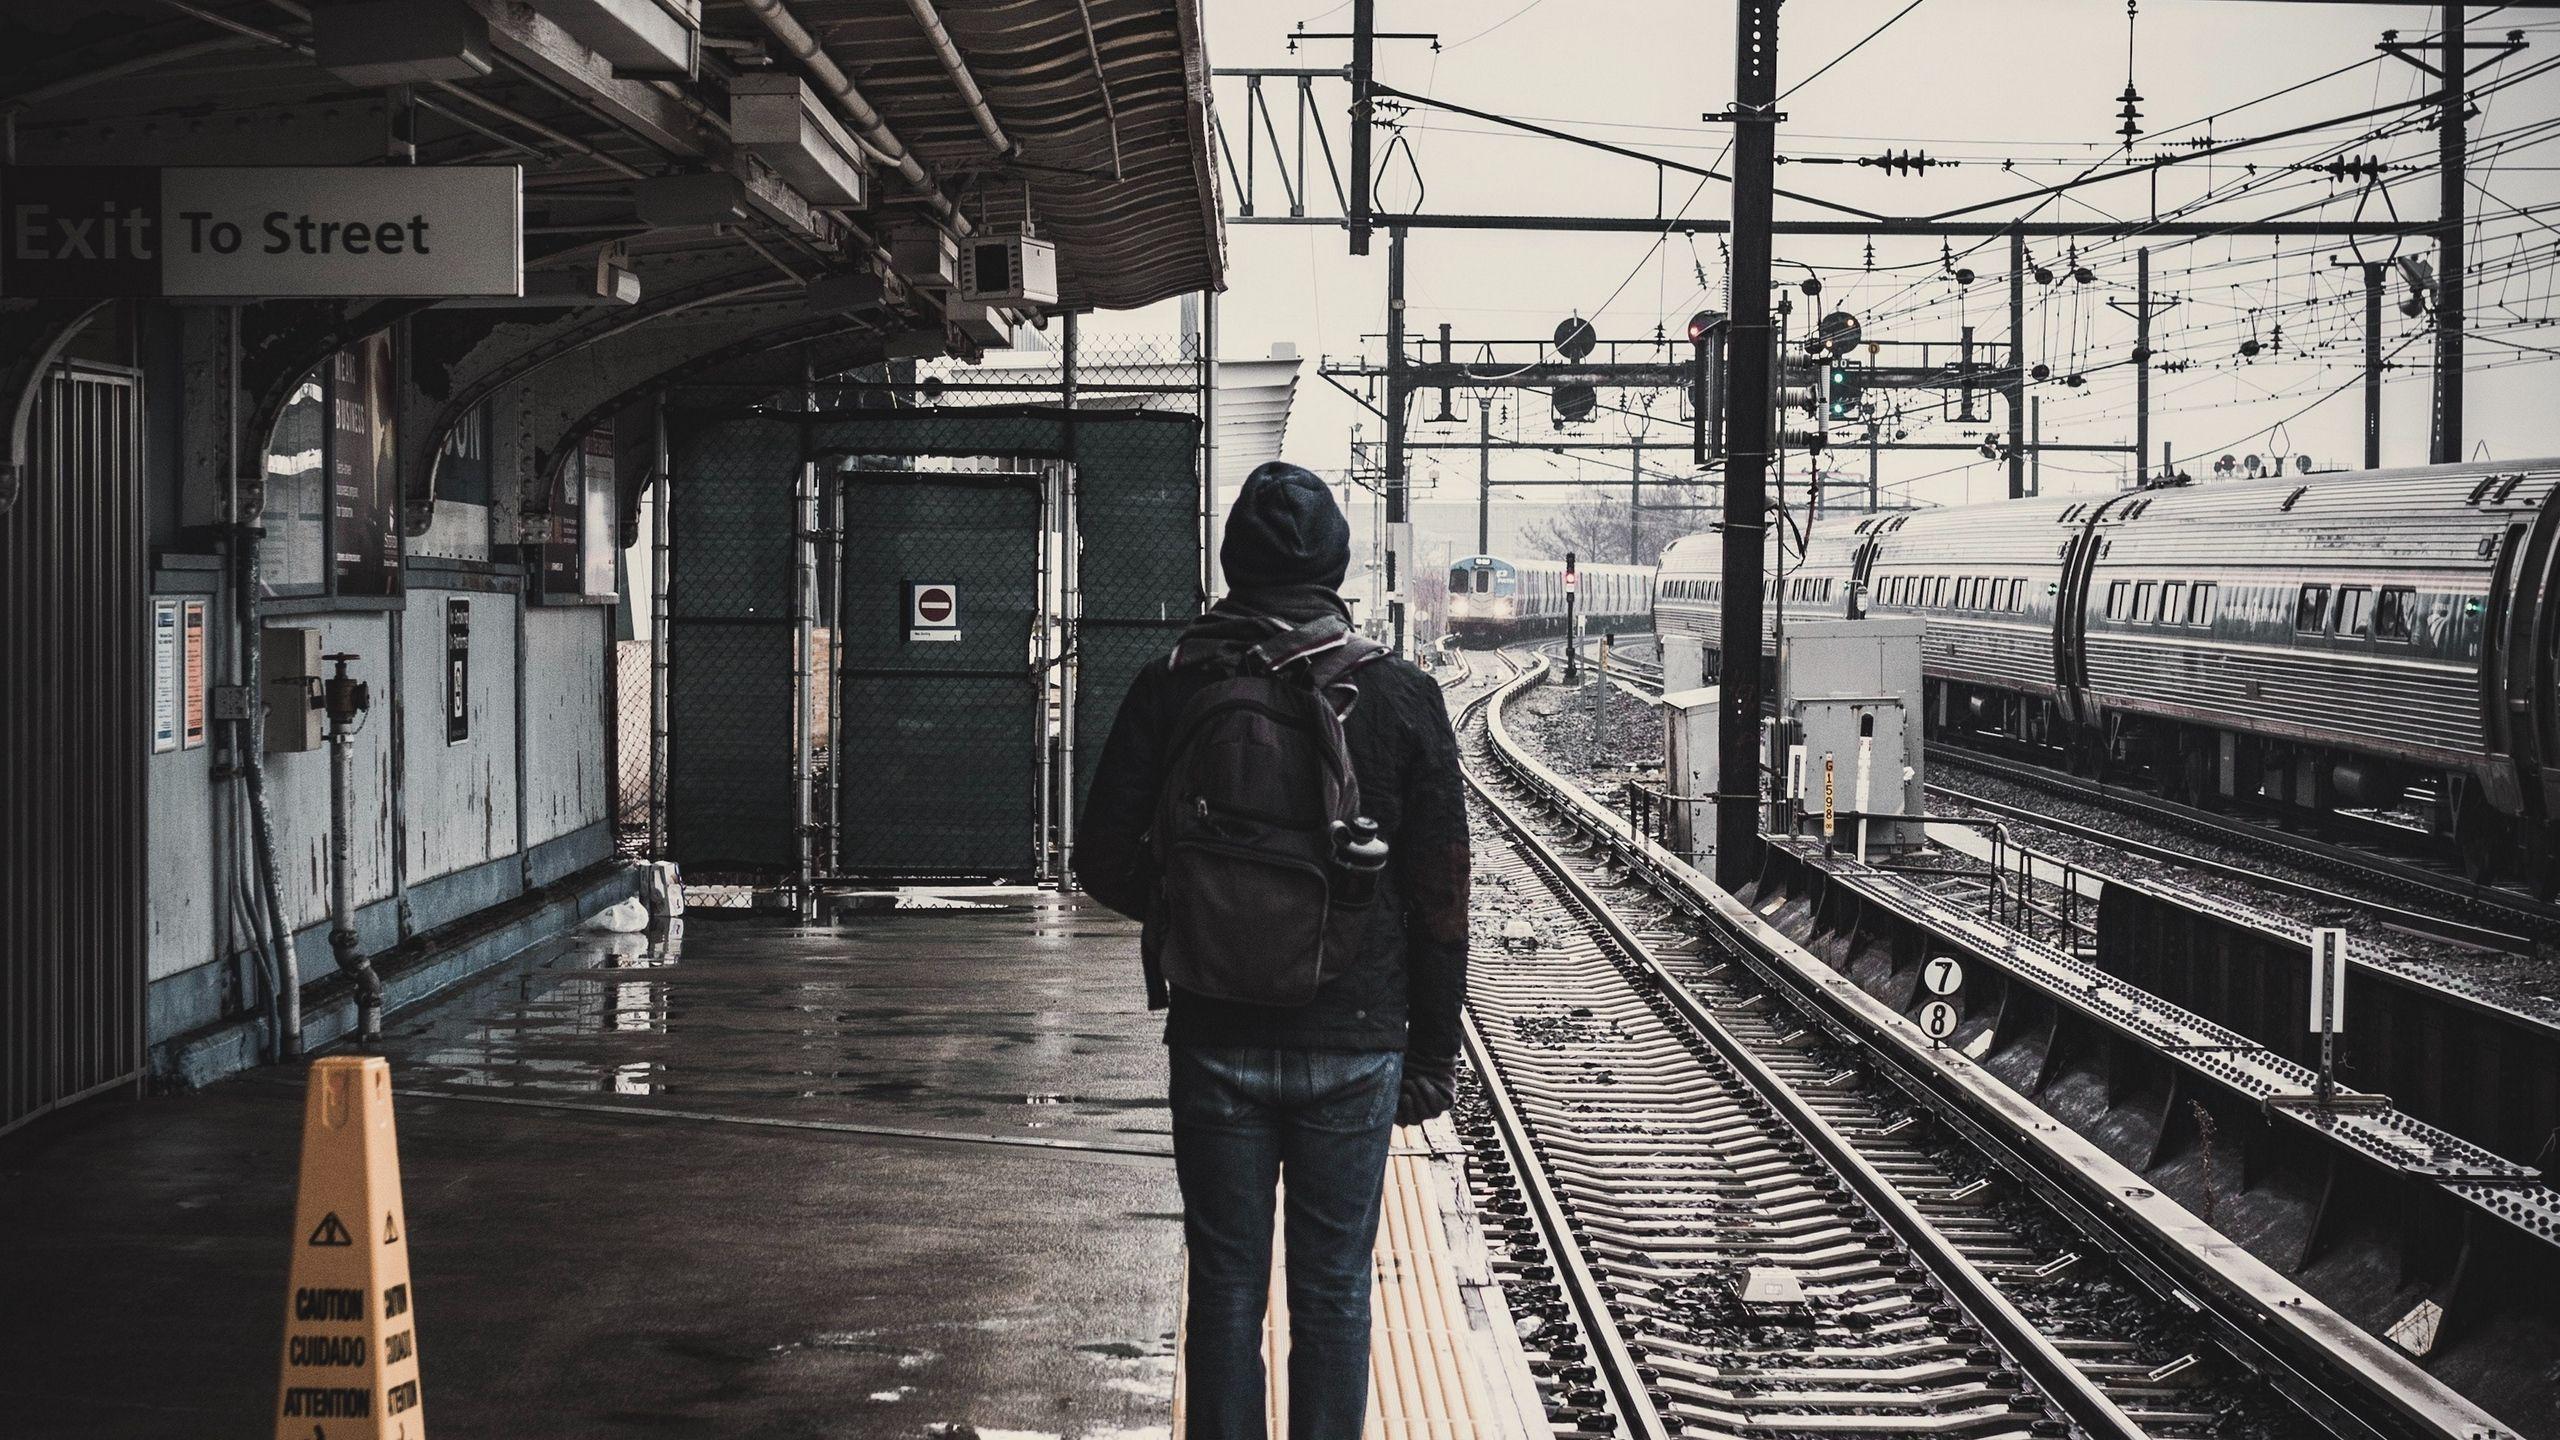 750 Train Station Pictures HD  Download Free Images on Unsplash